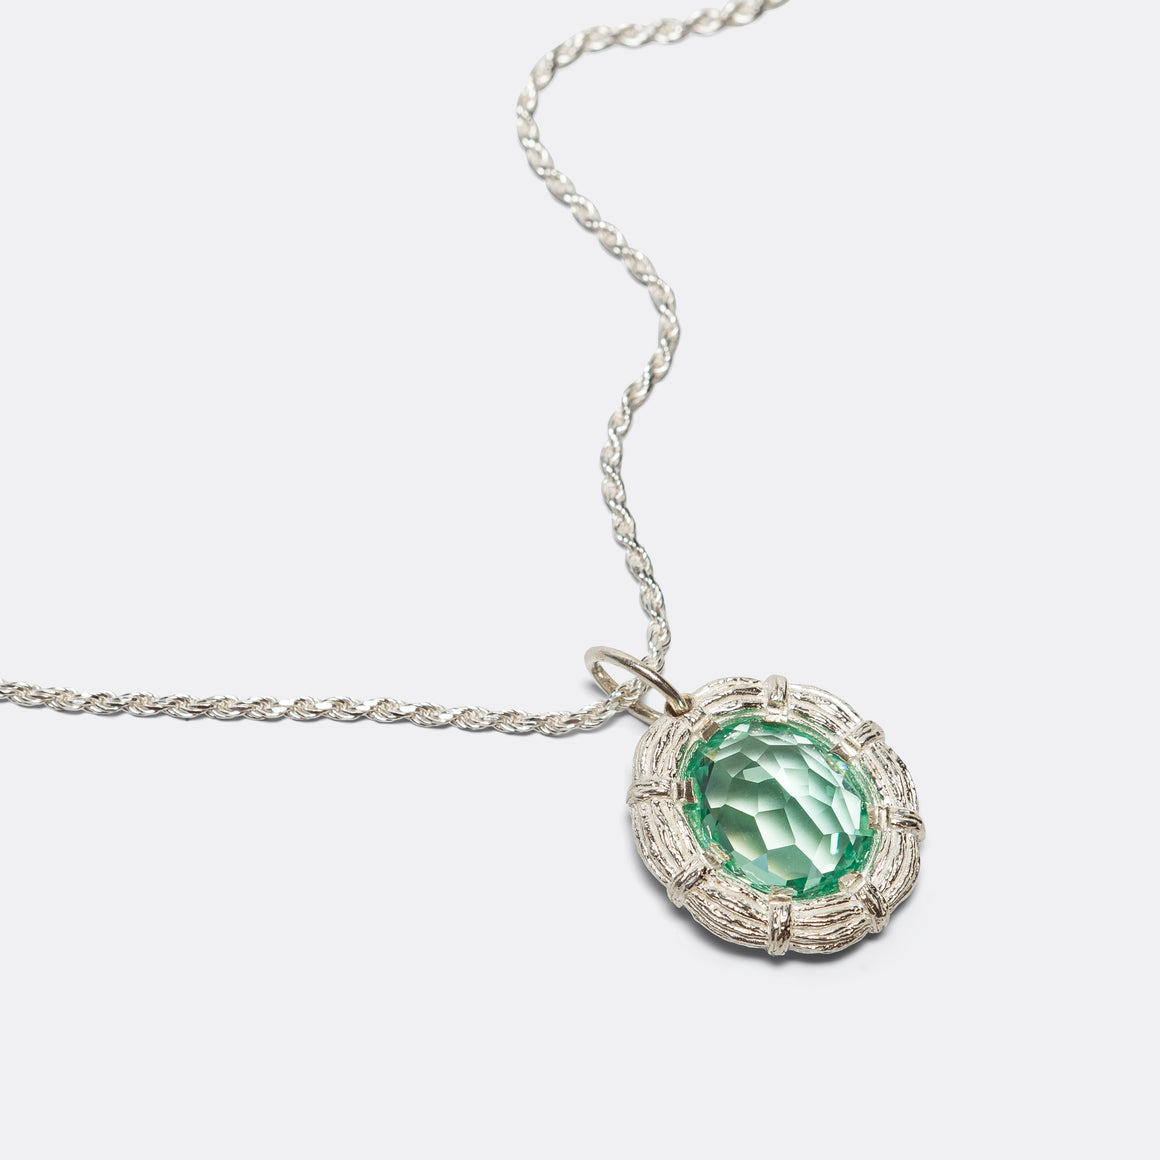 Bound Willow Pendant - 925 Silver/Green Sapphire